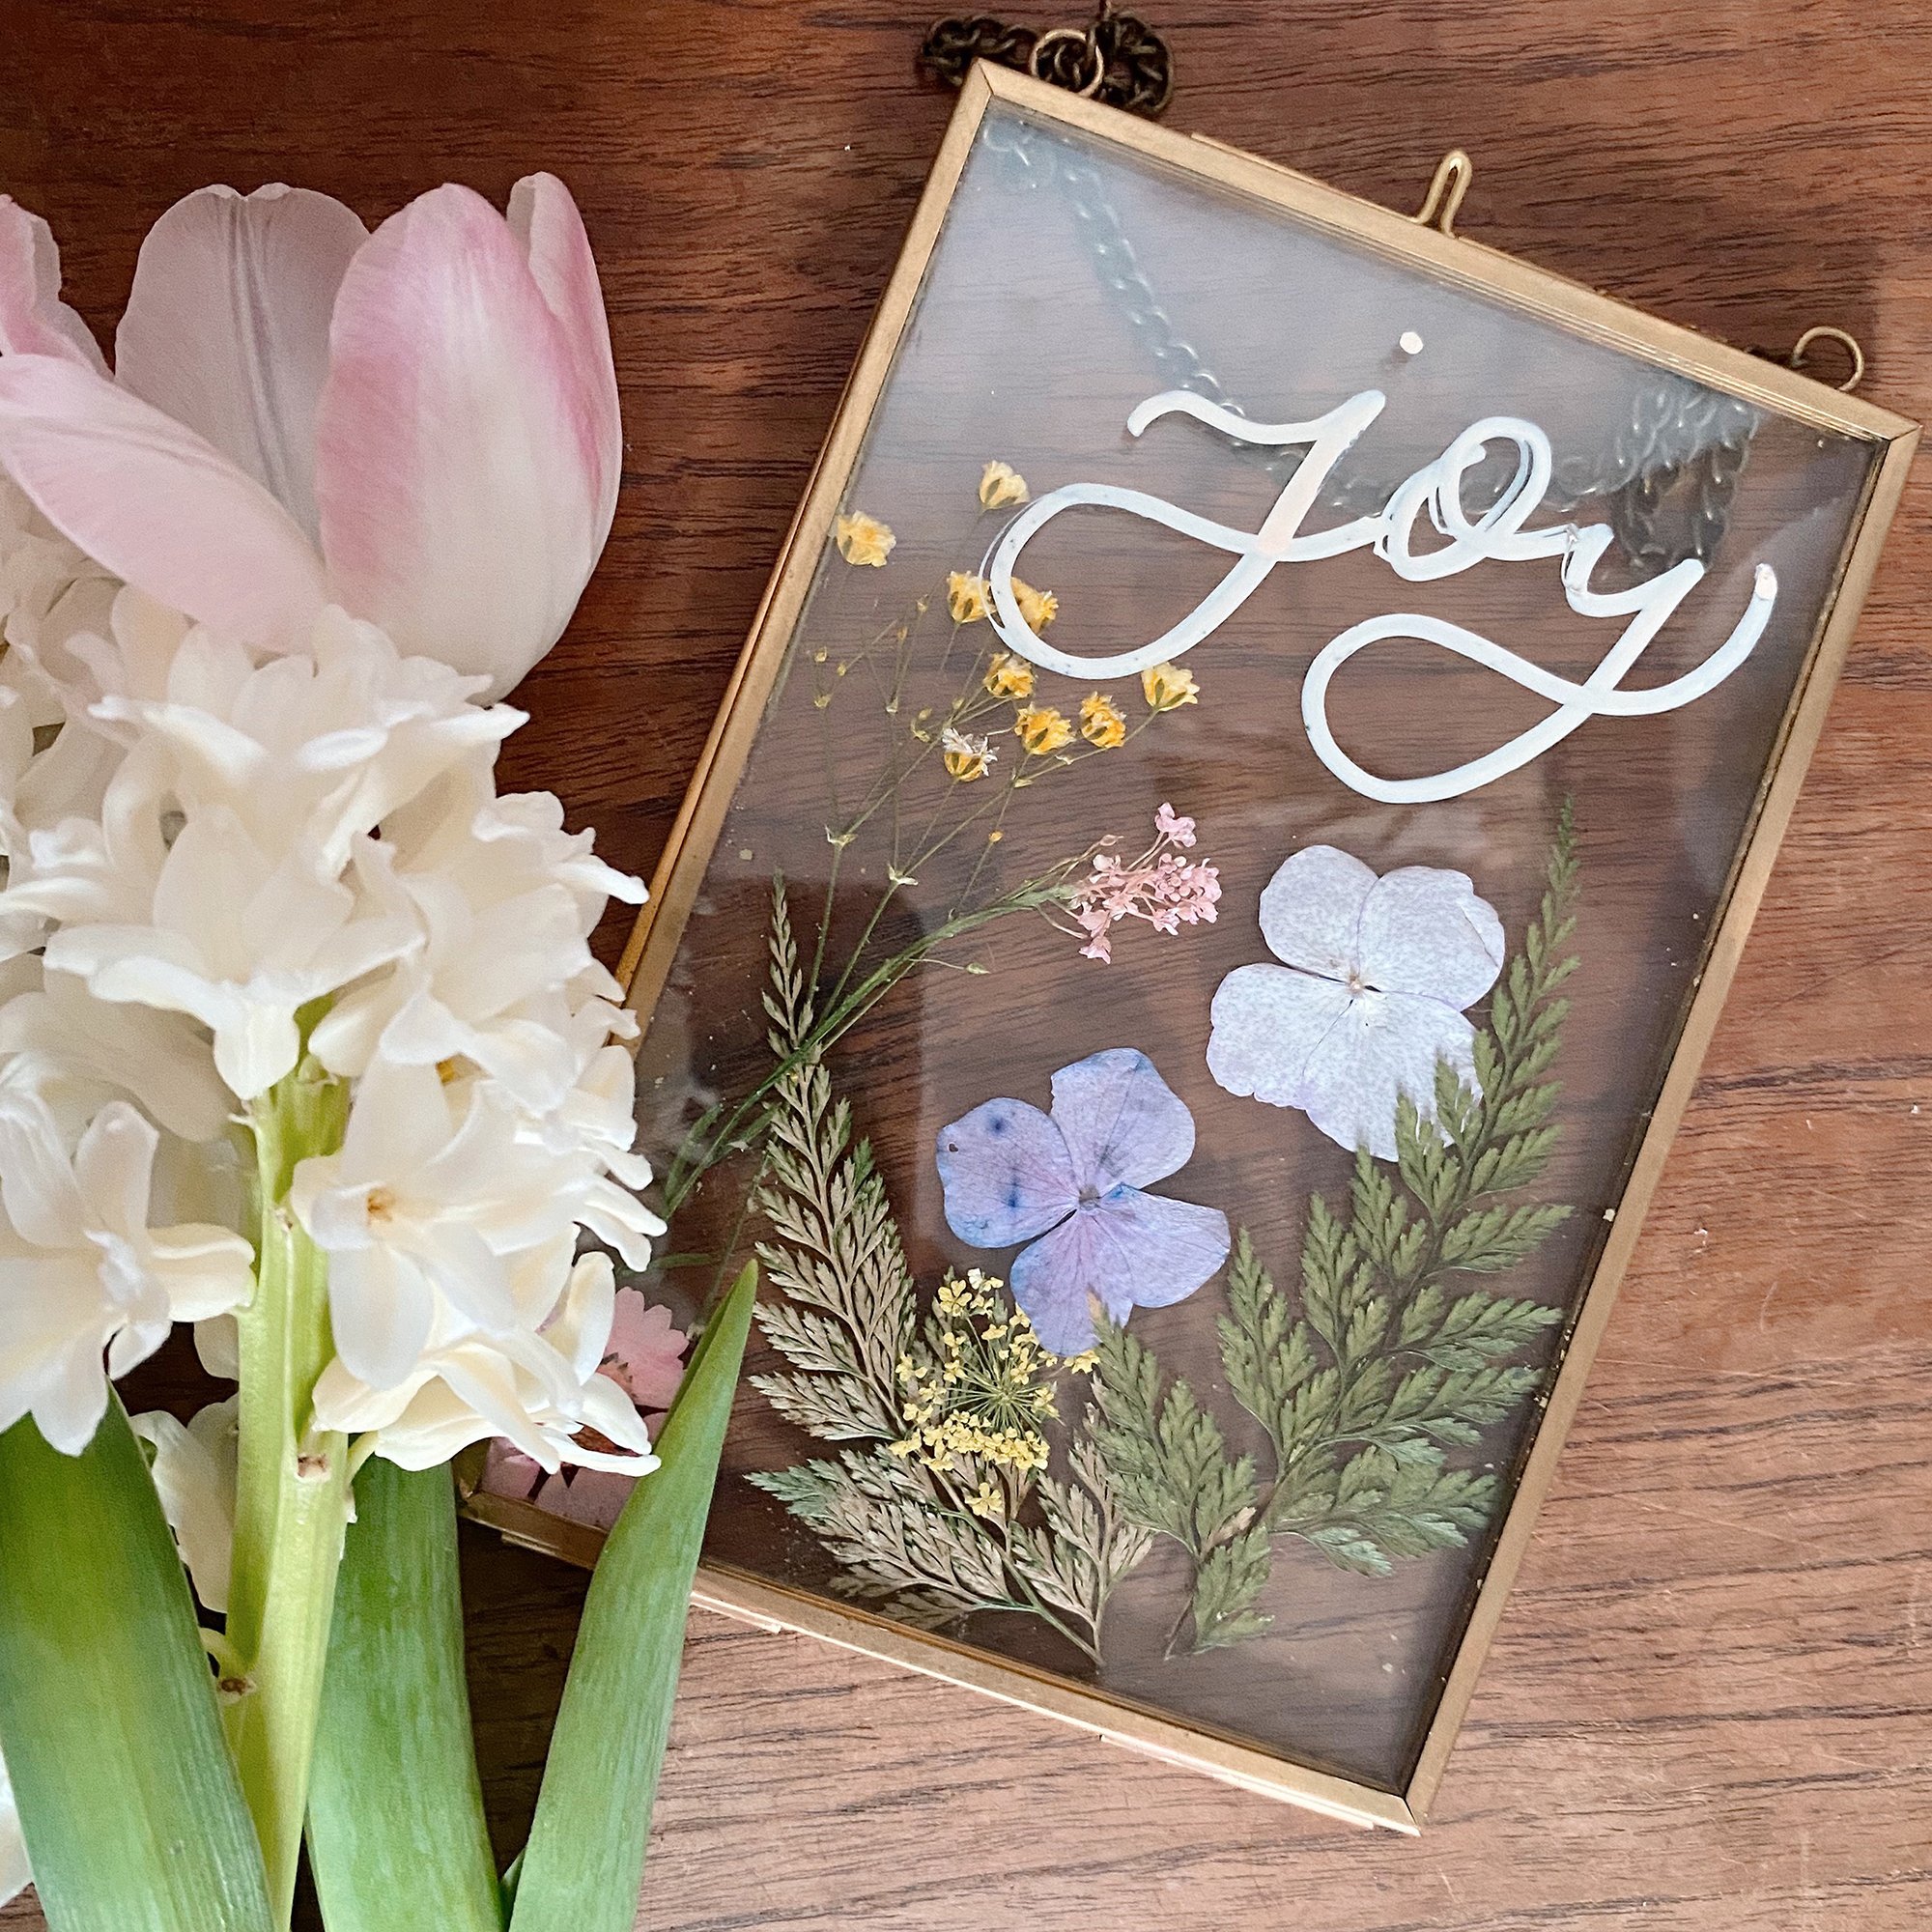 How to Frame Pressed Flowers: 5 Easy Tips - FastFrame